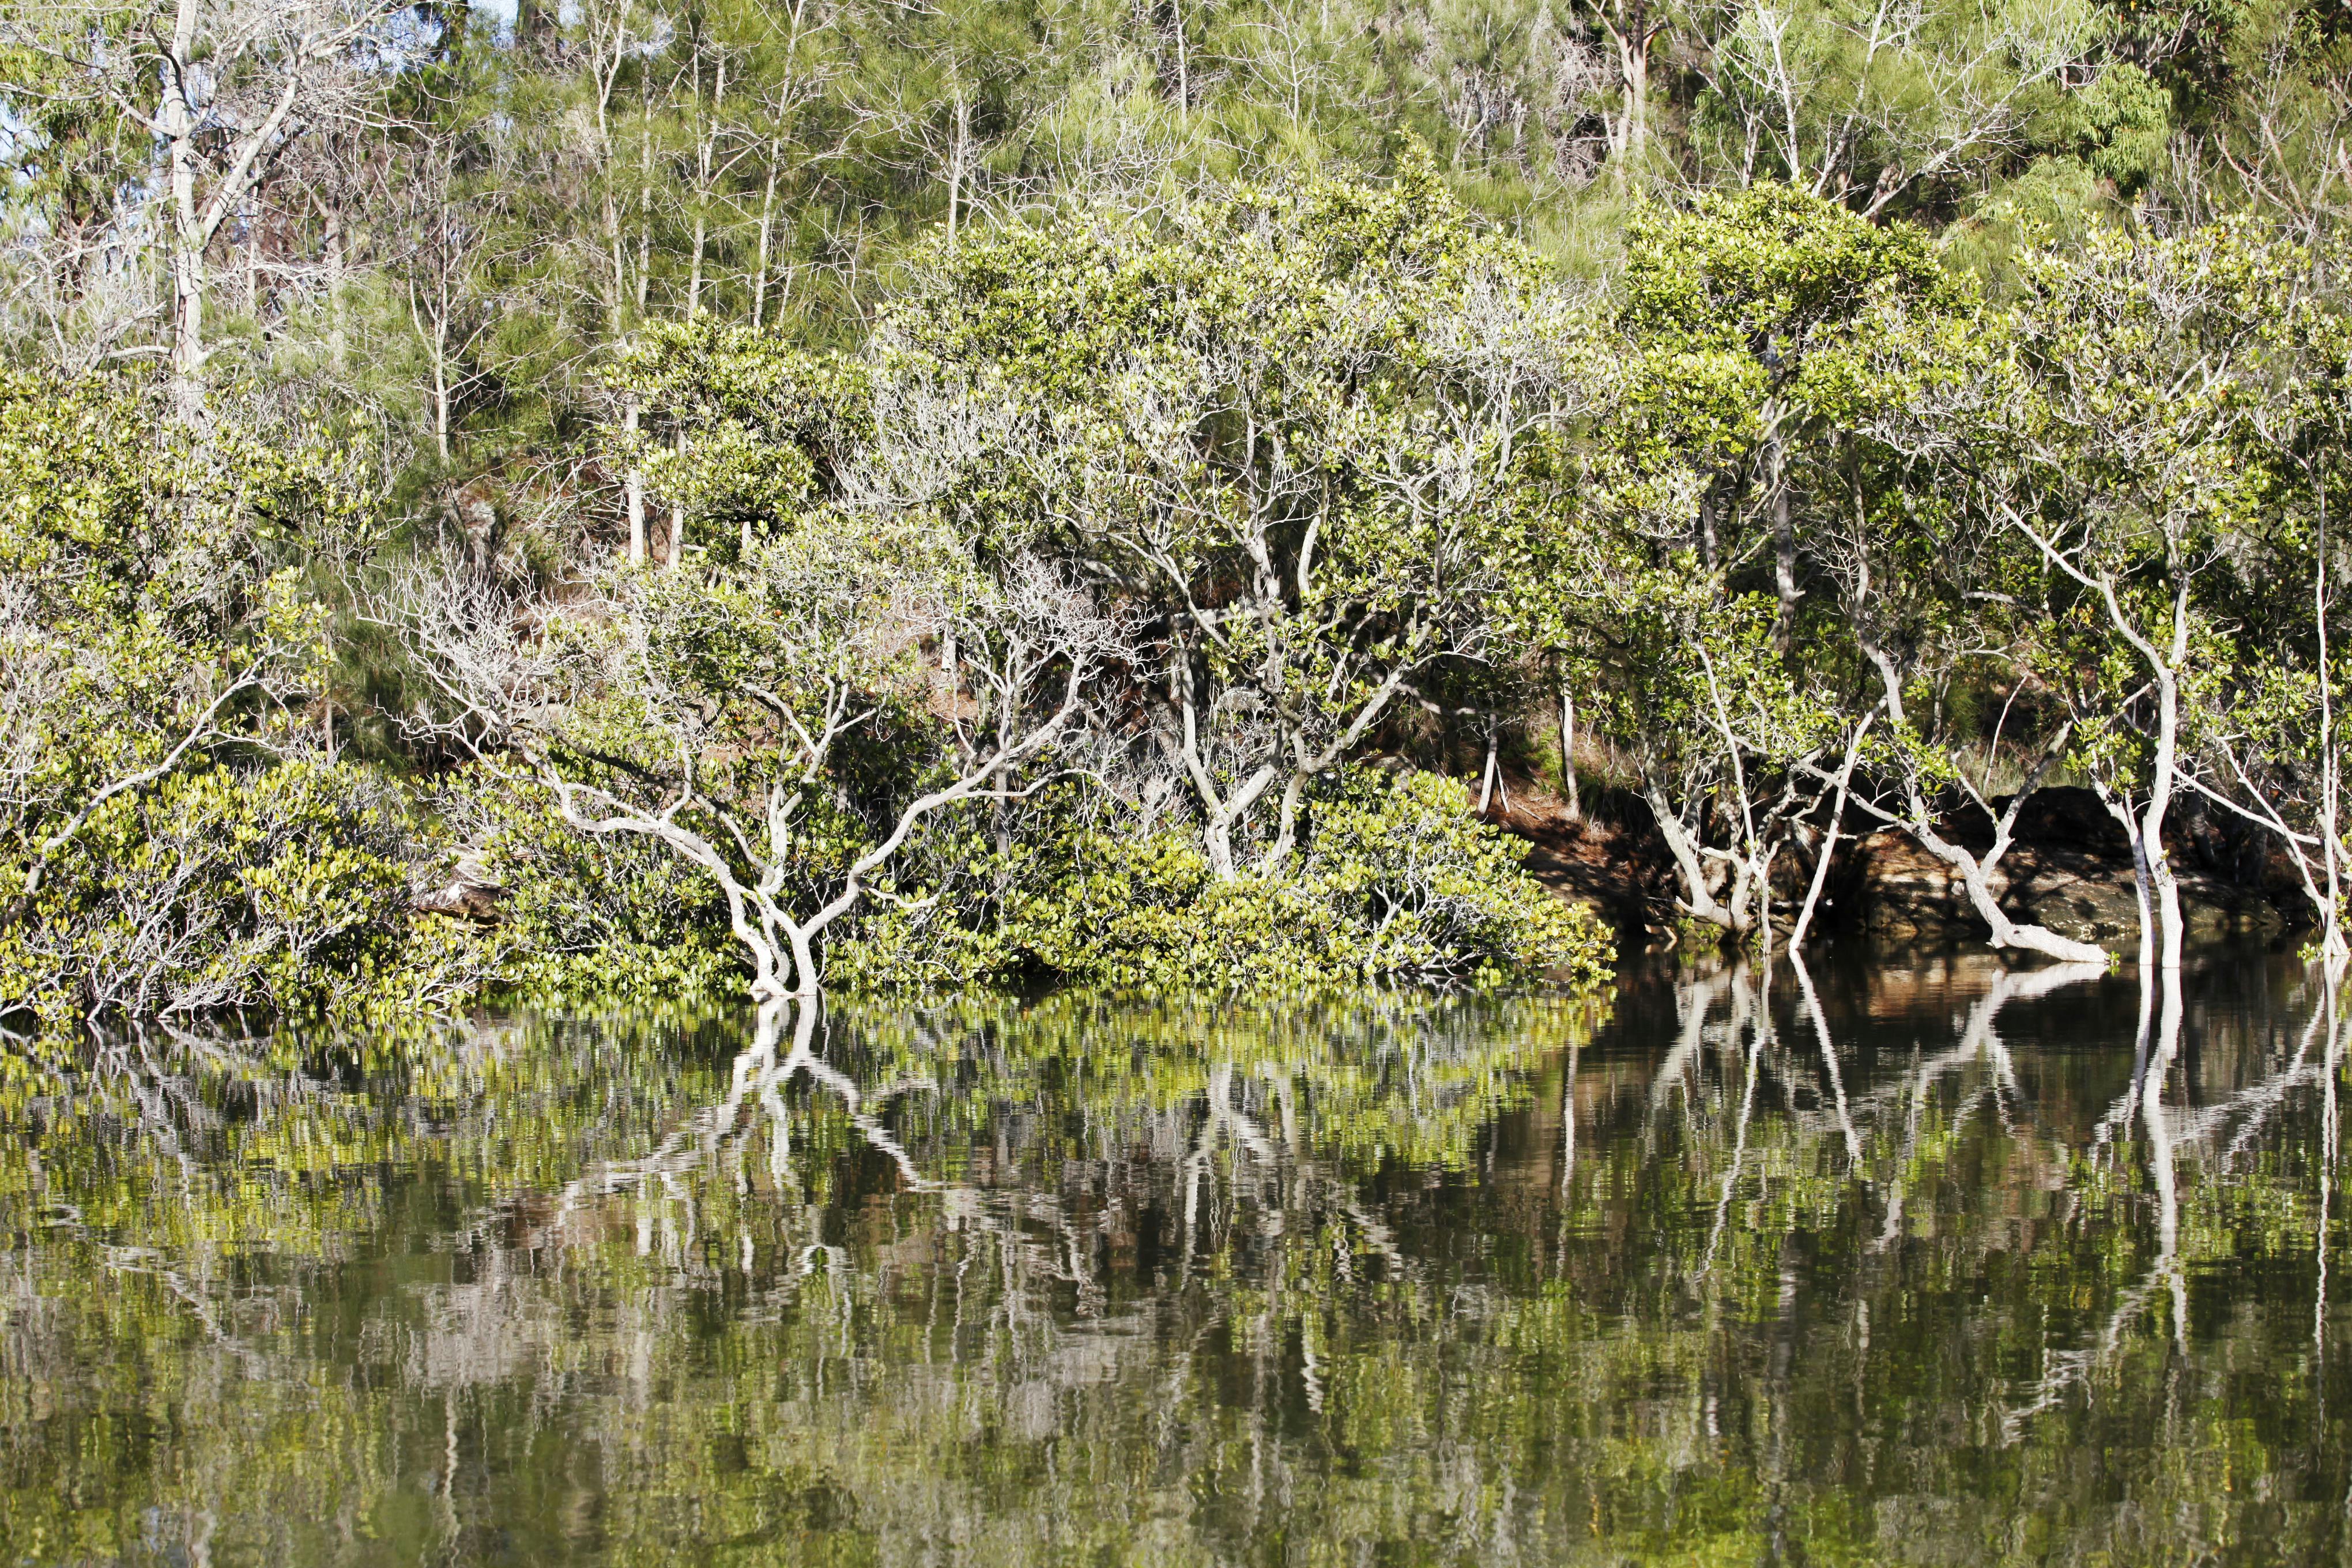 Reflection of native Australian trees in the water